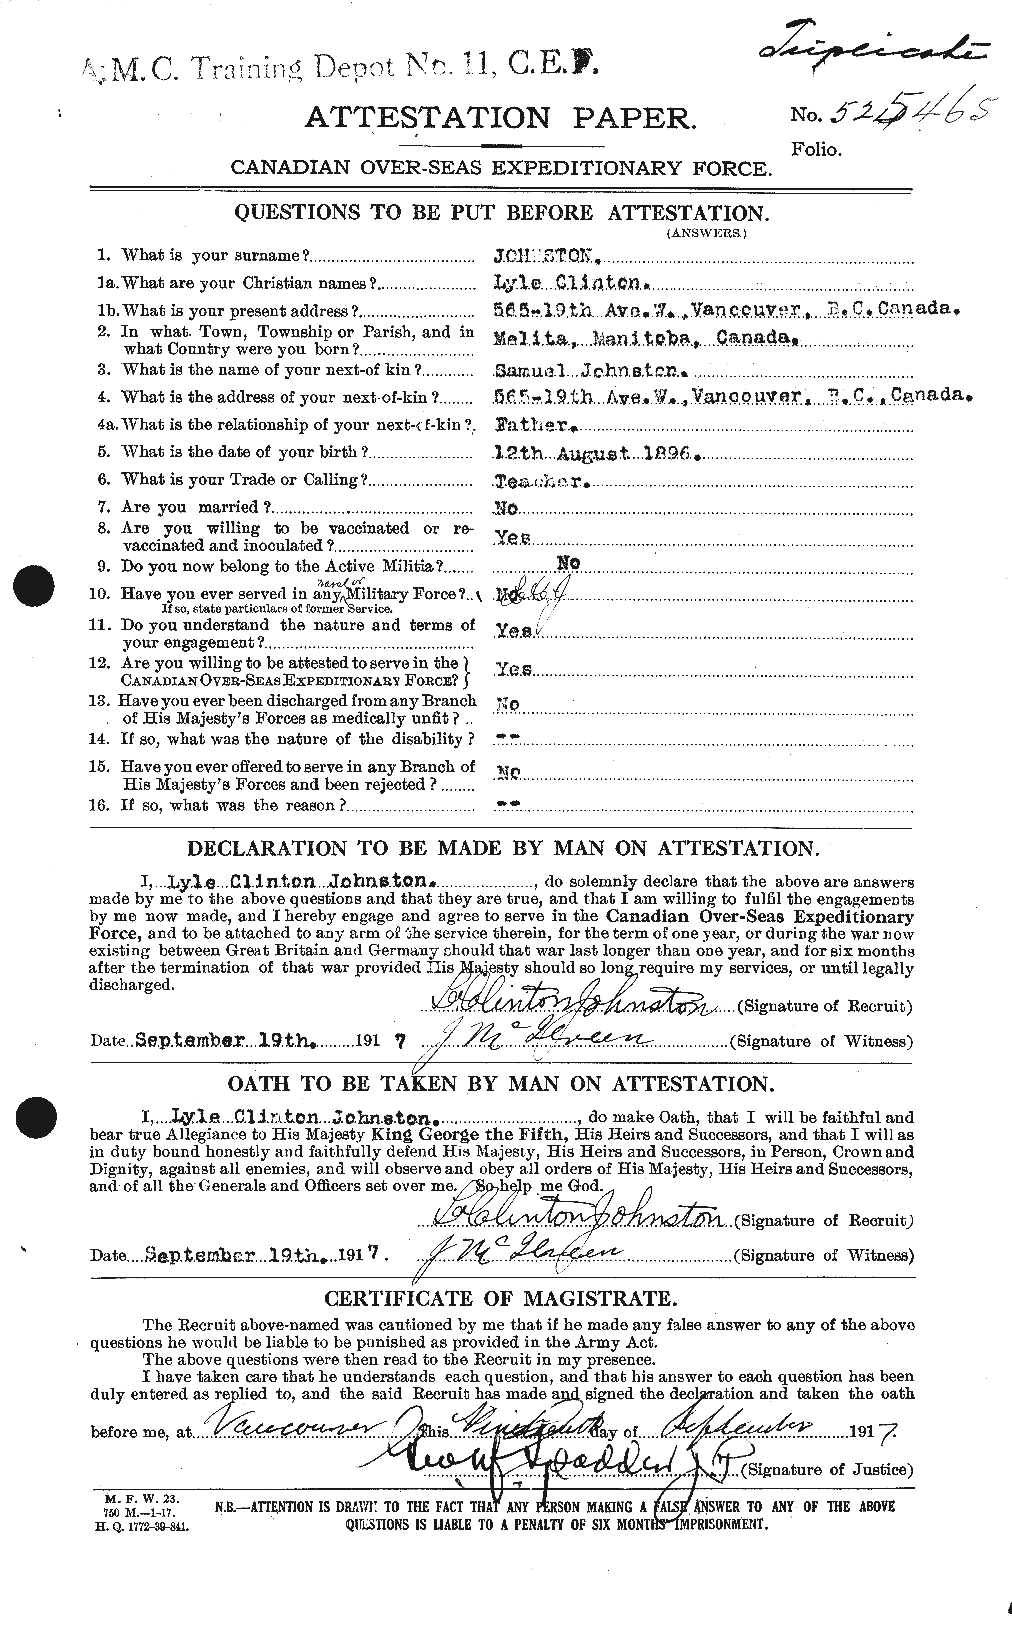 Personnel Records of the First World War - CEF 422963a